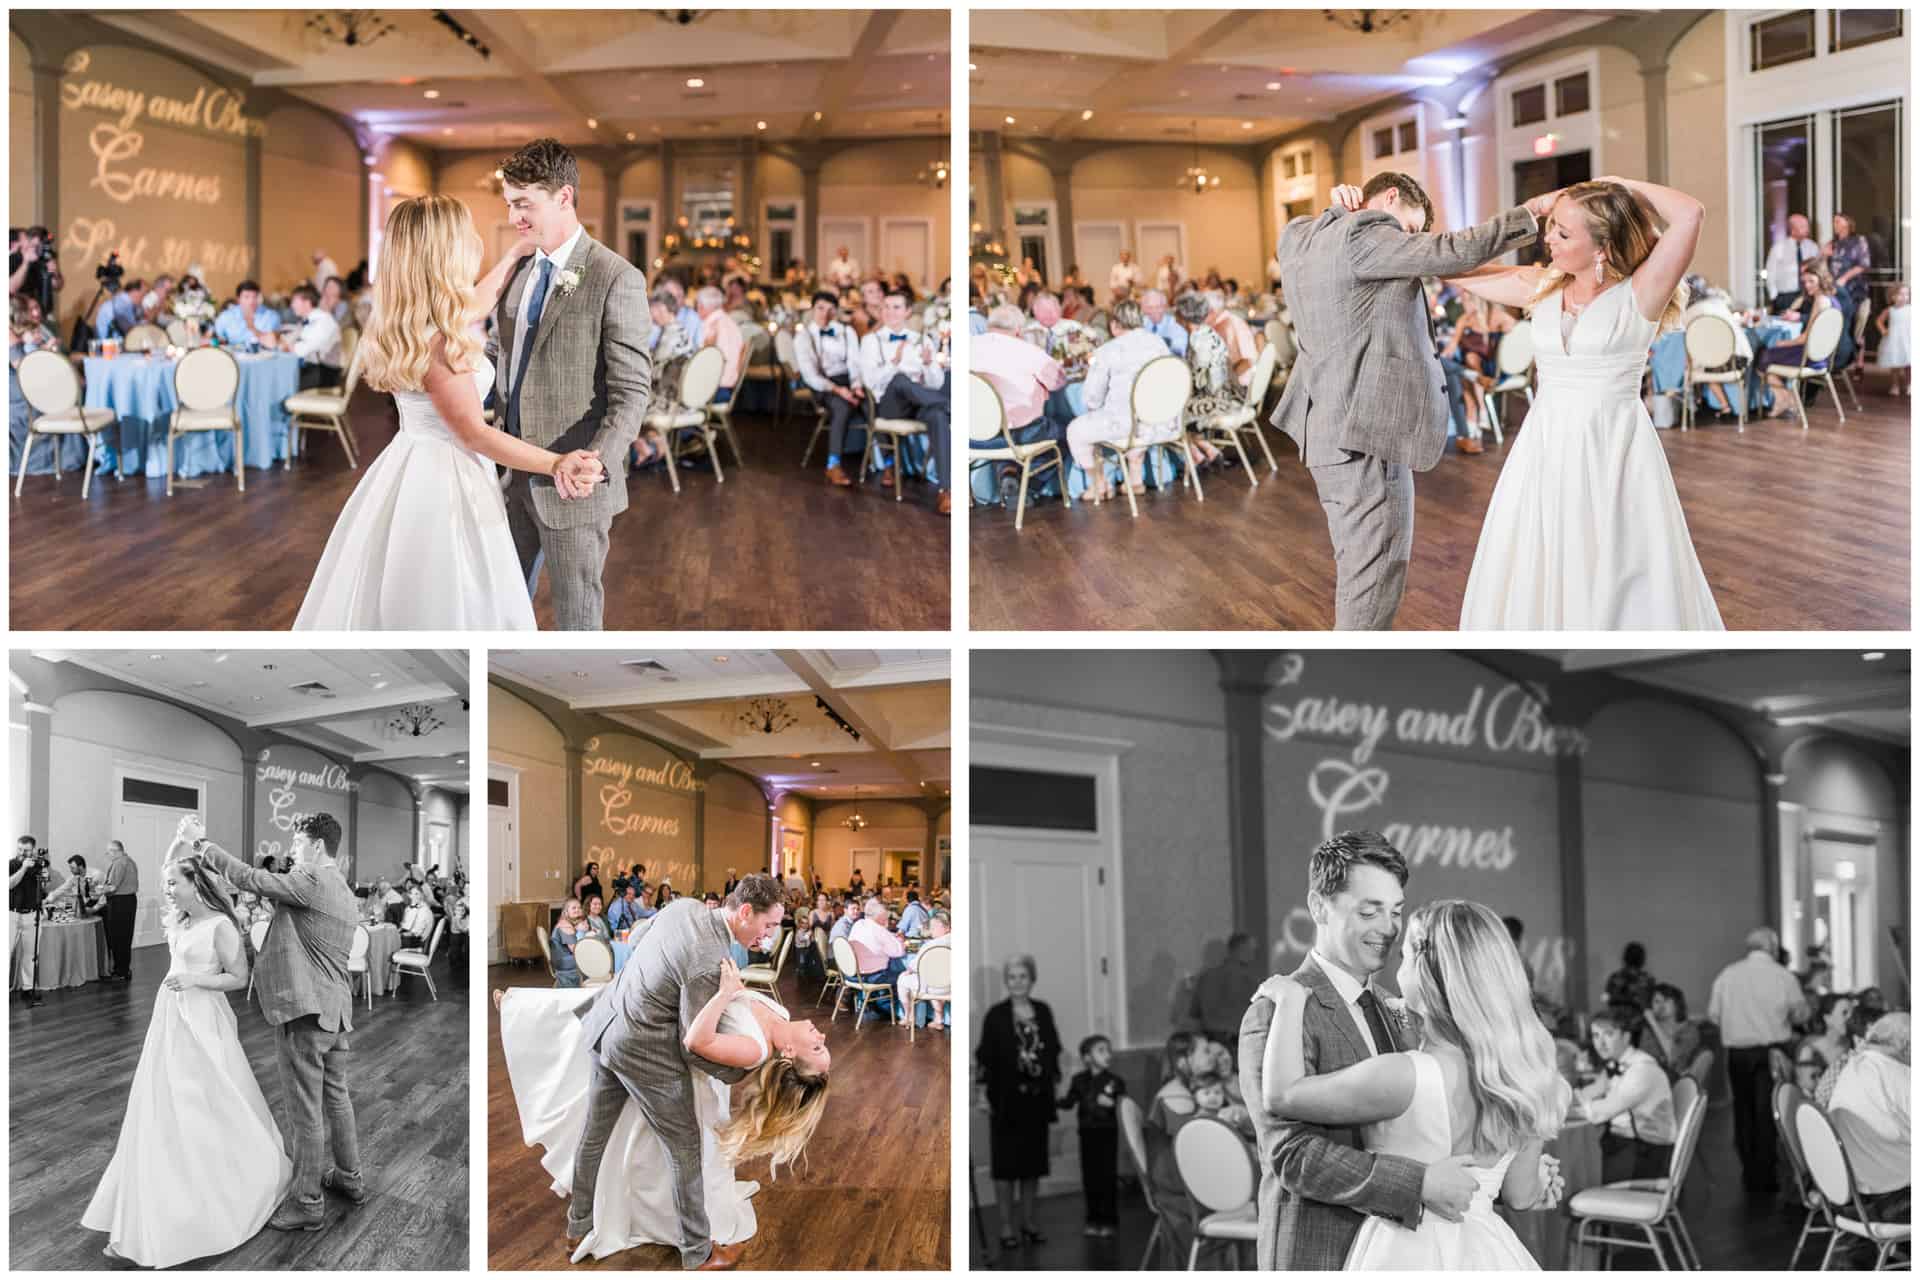 Bride and Groom - Indoor wedding reception - first dance in ball gown